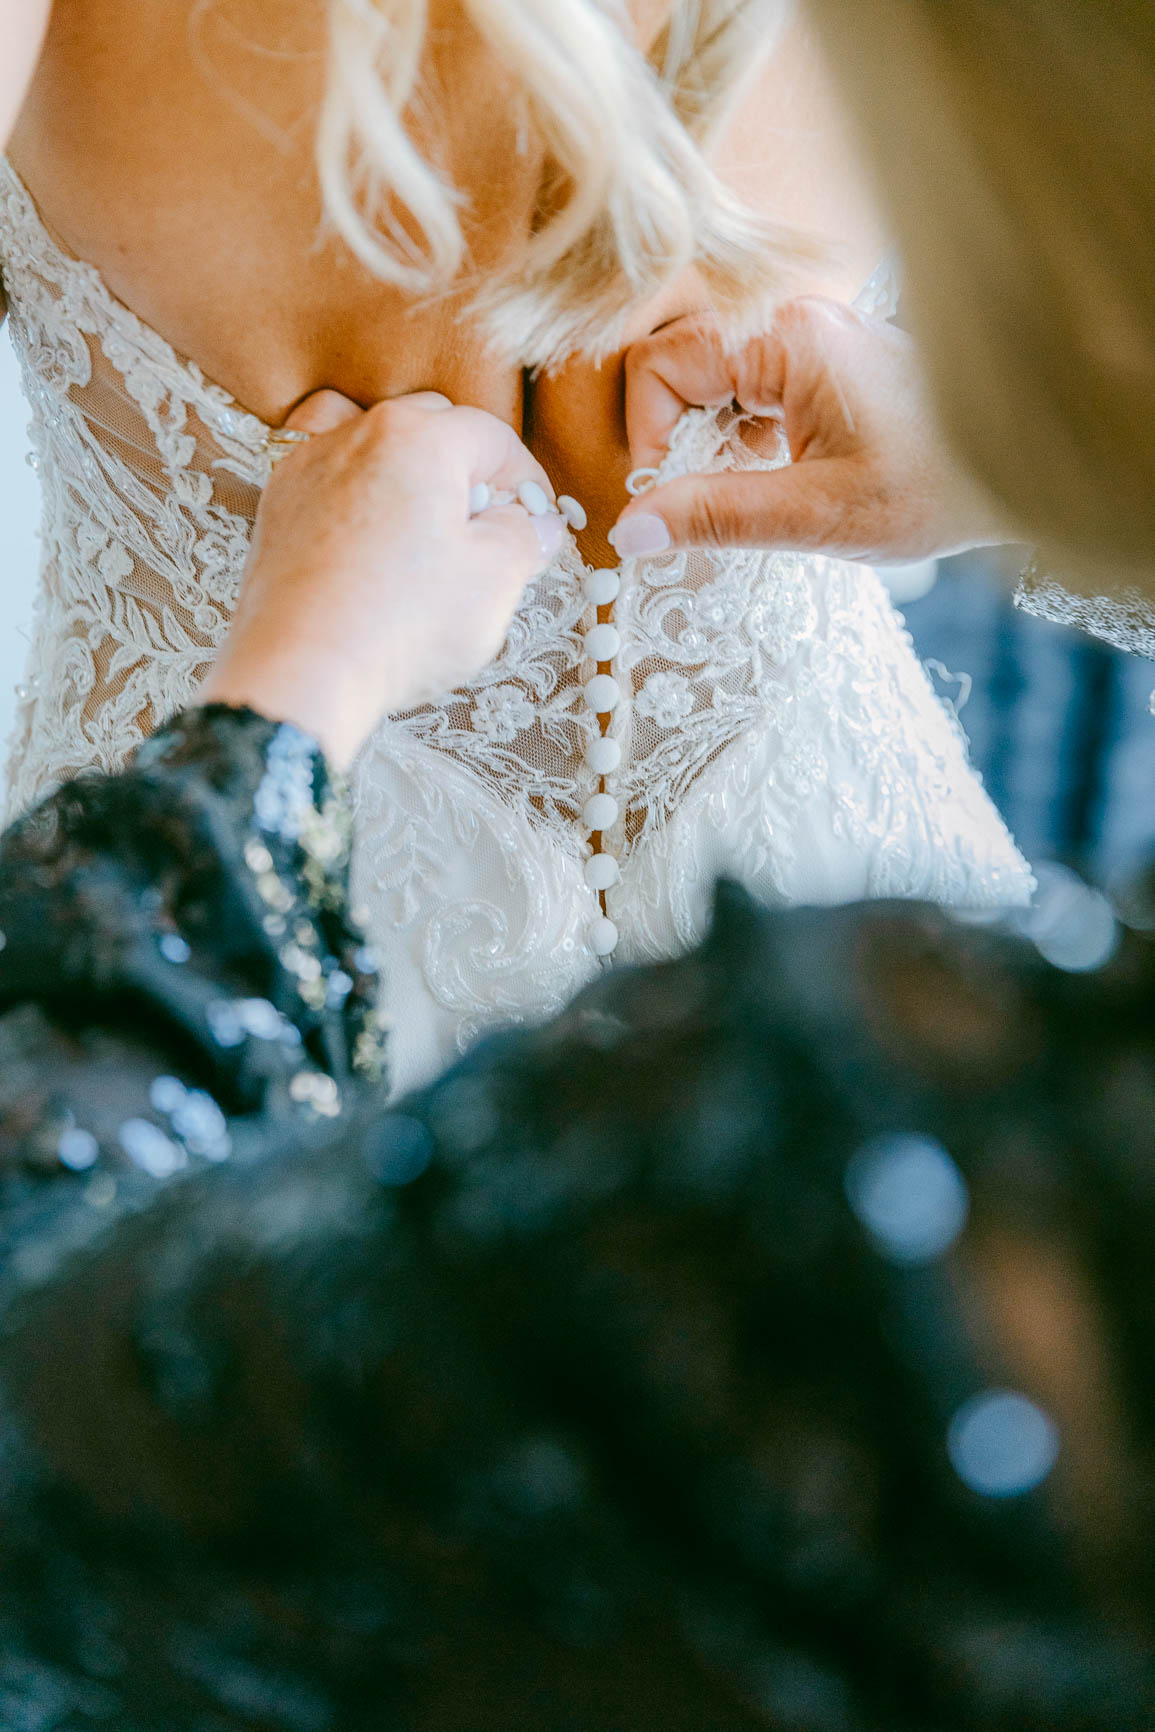 Bride putting on lace dress shot by Nhieu Tang Photography | nhieutang.com